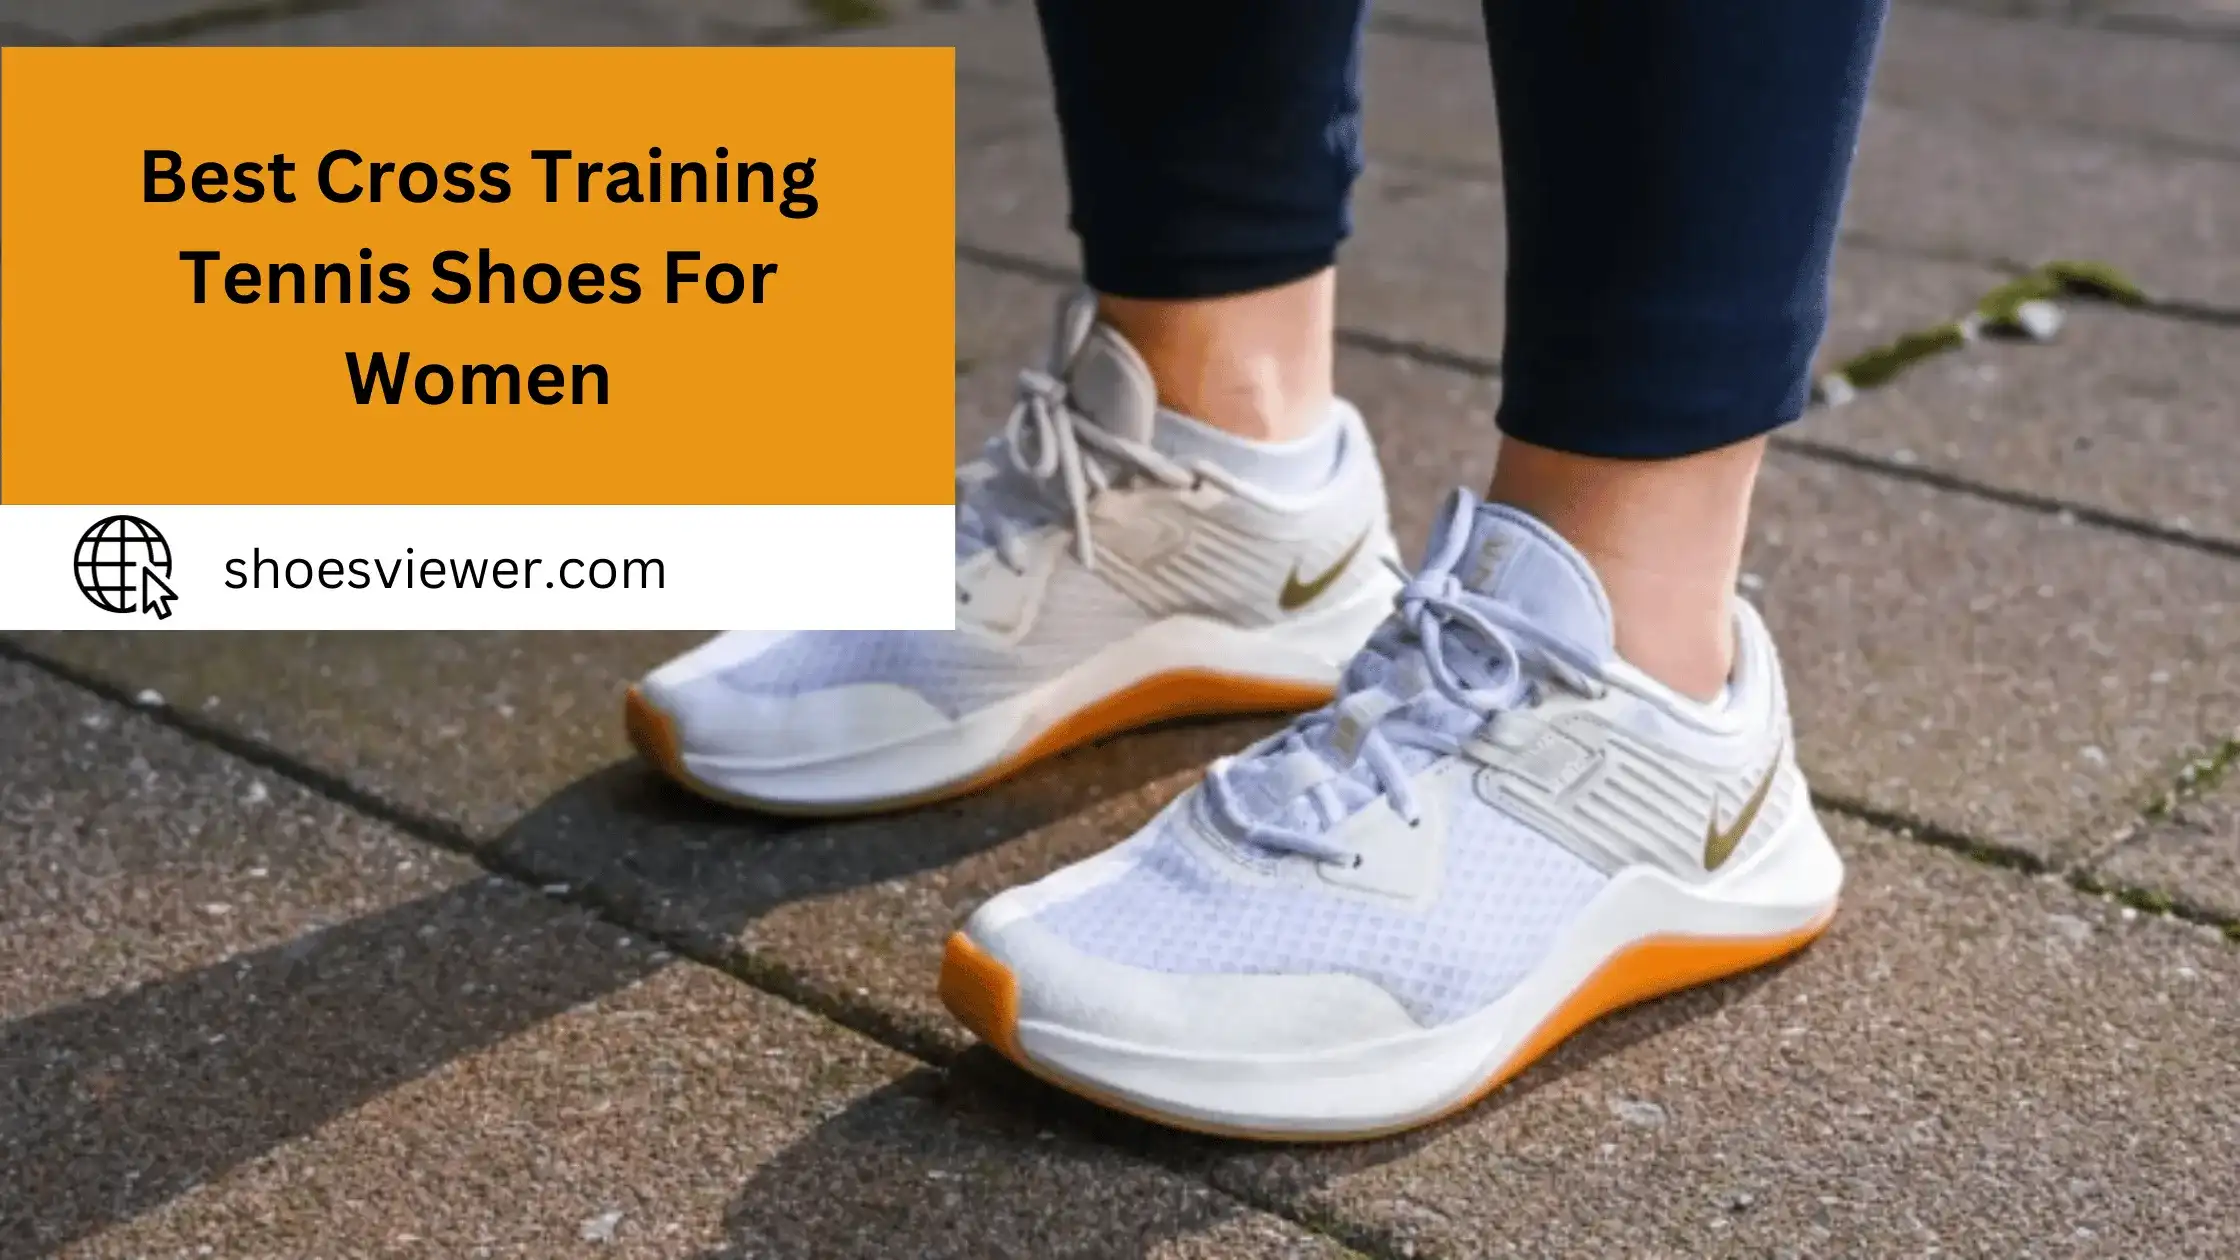 Best Cross Training Tennis Shoes For Women - Latest Guide